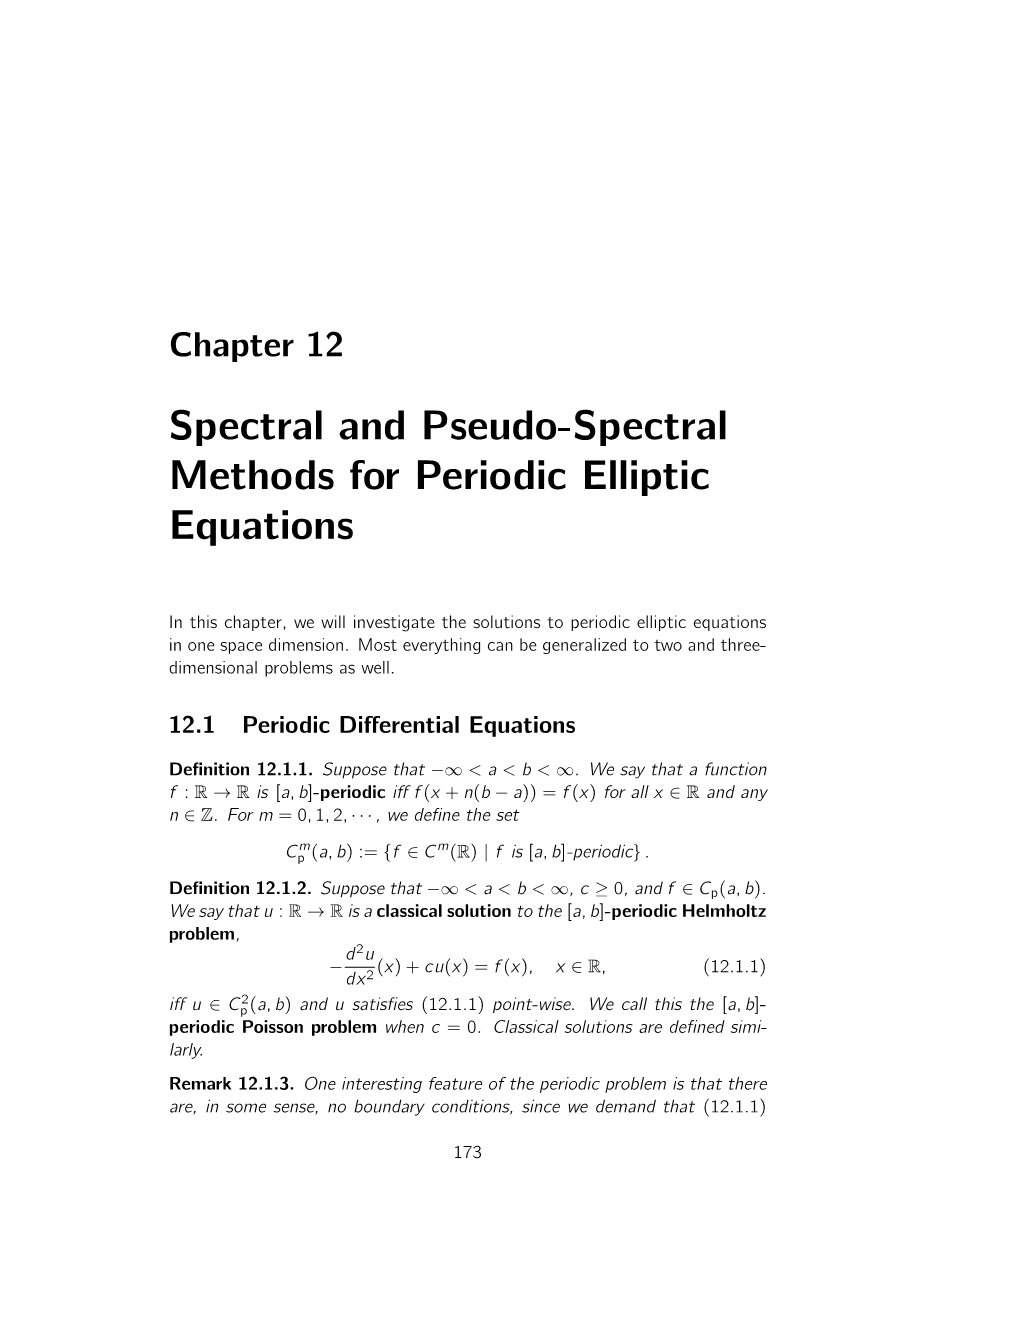 Spectral and Pseudo-Spectral Methods for Periodic Elliptic Equations